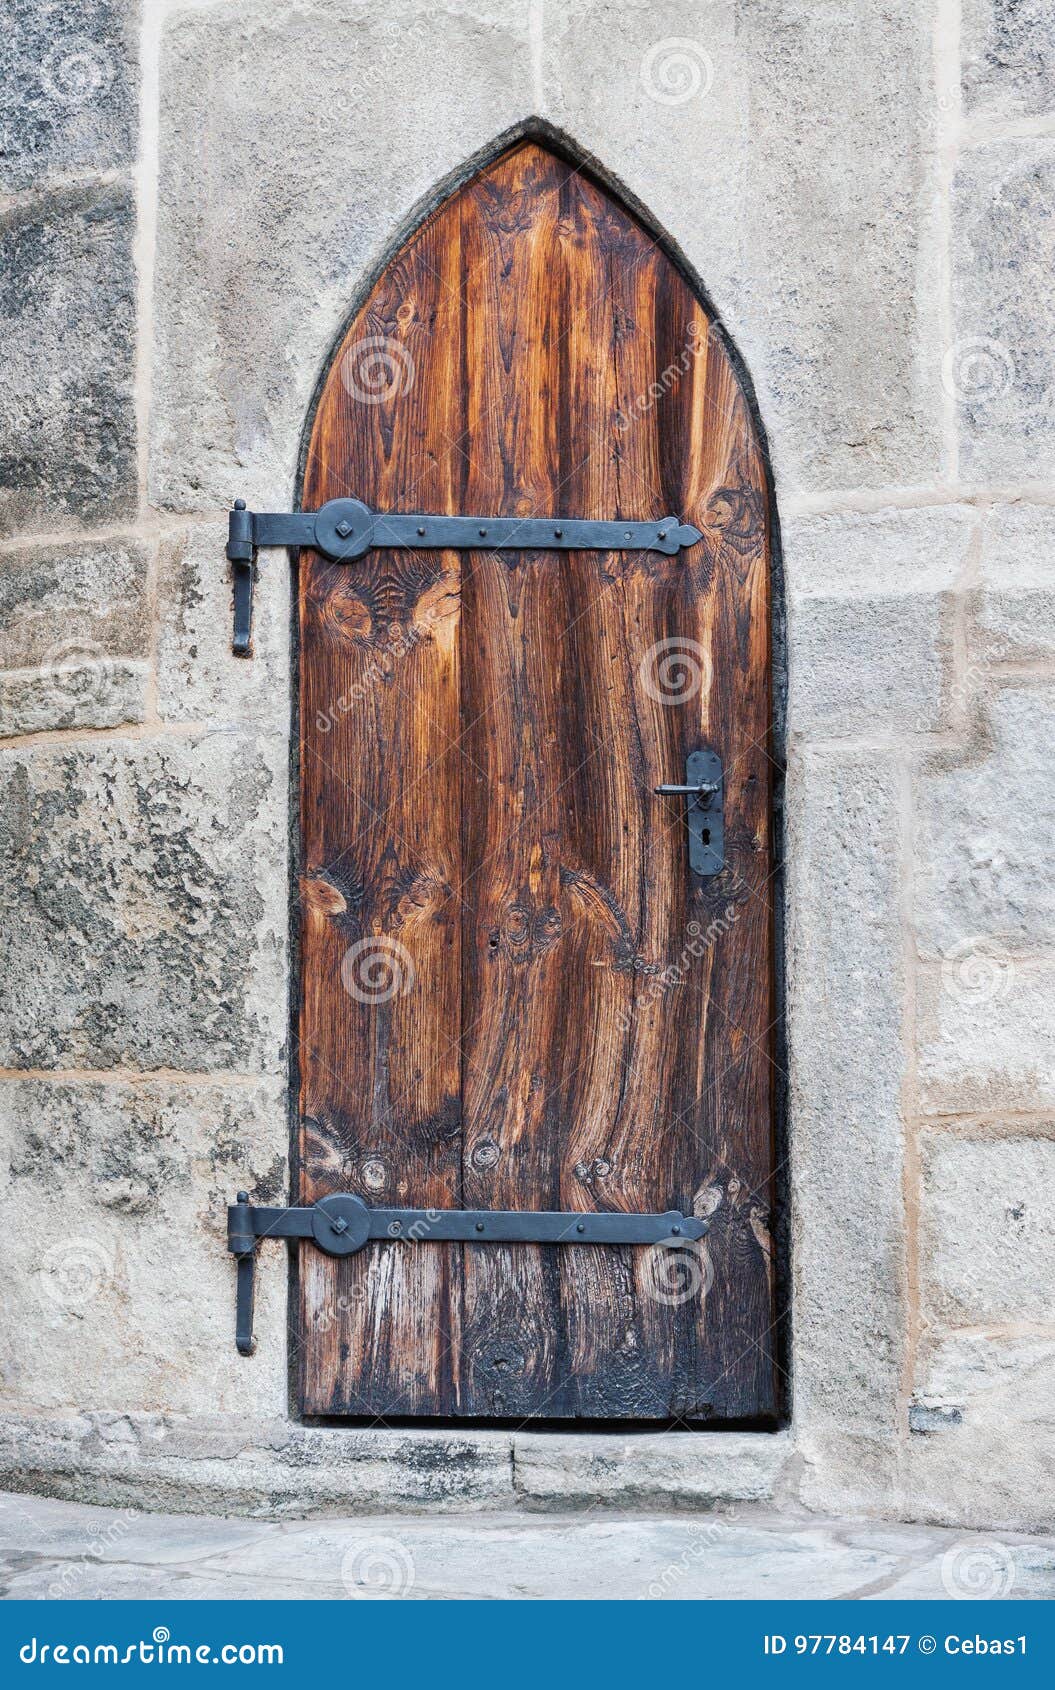 Wooden Medieval Castle Doors Stock Image - Image of vintage, entry